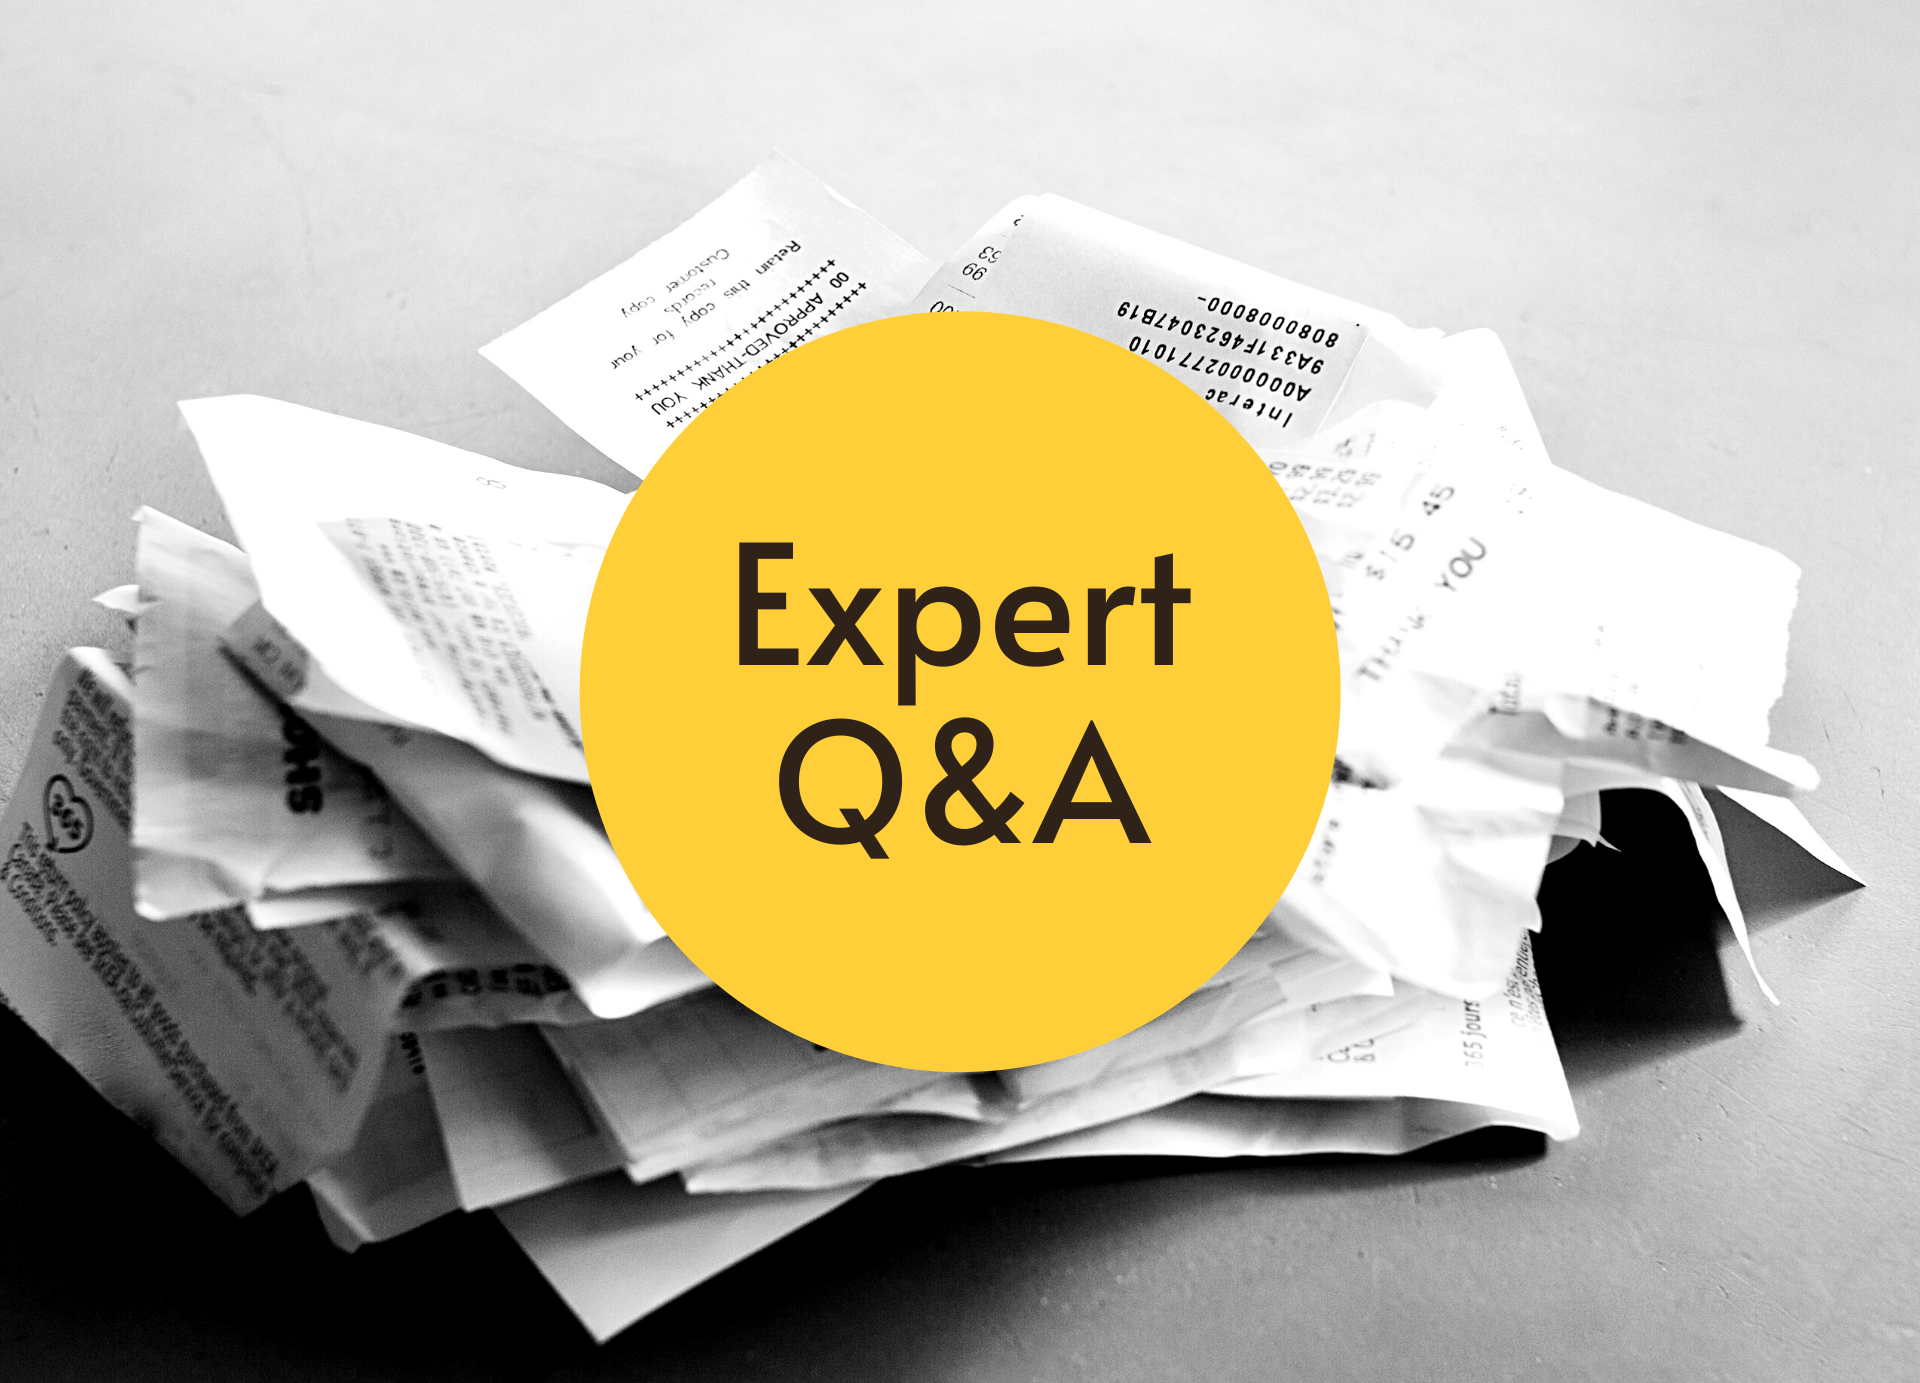 Pile of receipts with words "Expert Q&A" on a yellow circle